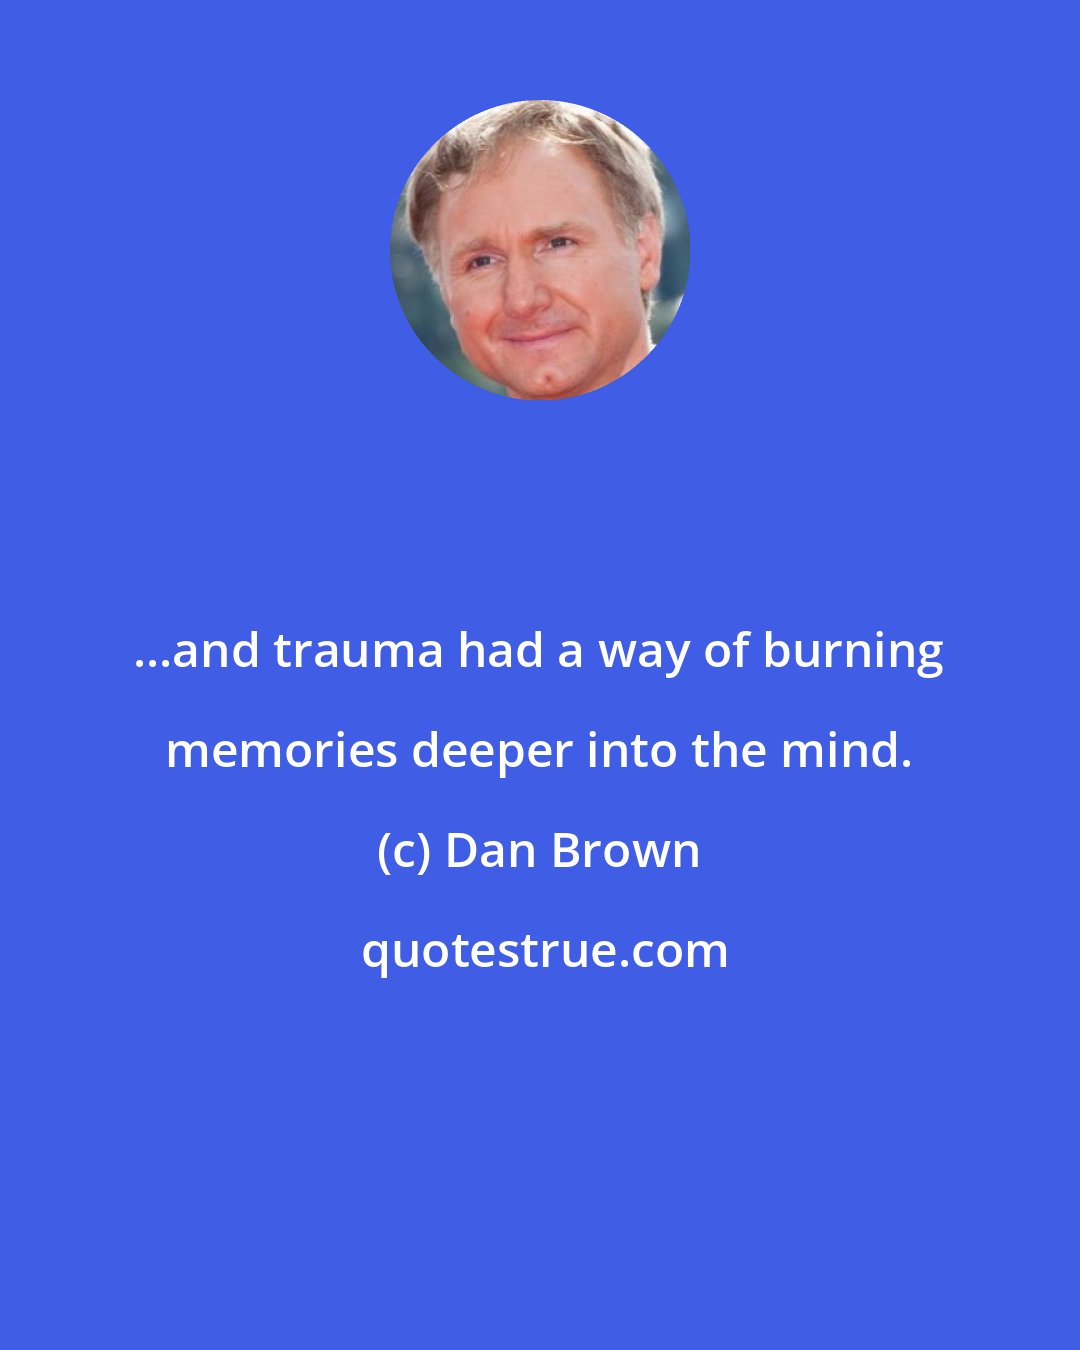 Dan Brown: ...and trauma had a way of burning memories deeper into the mind.